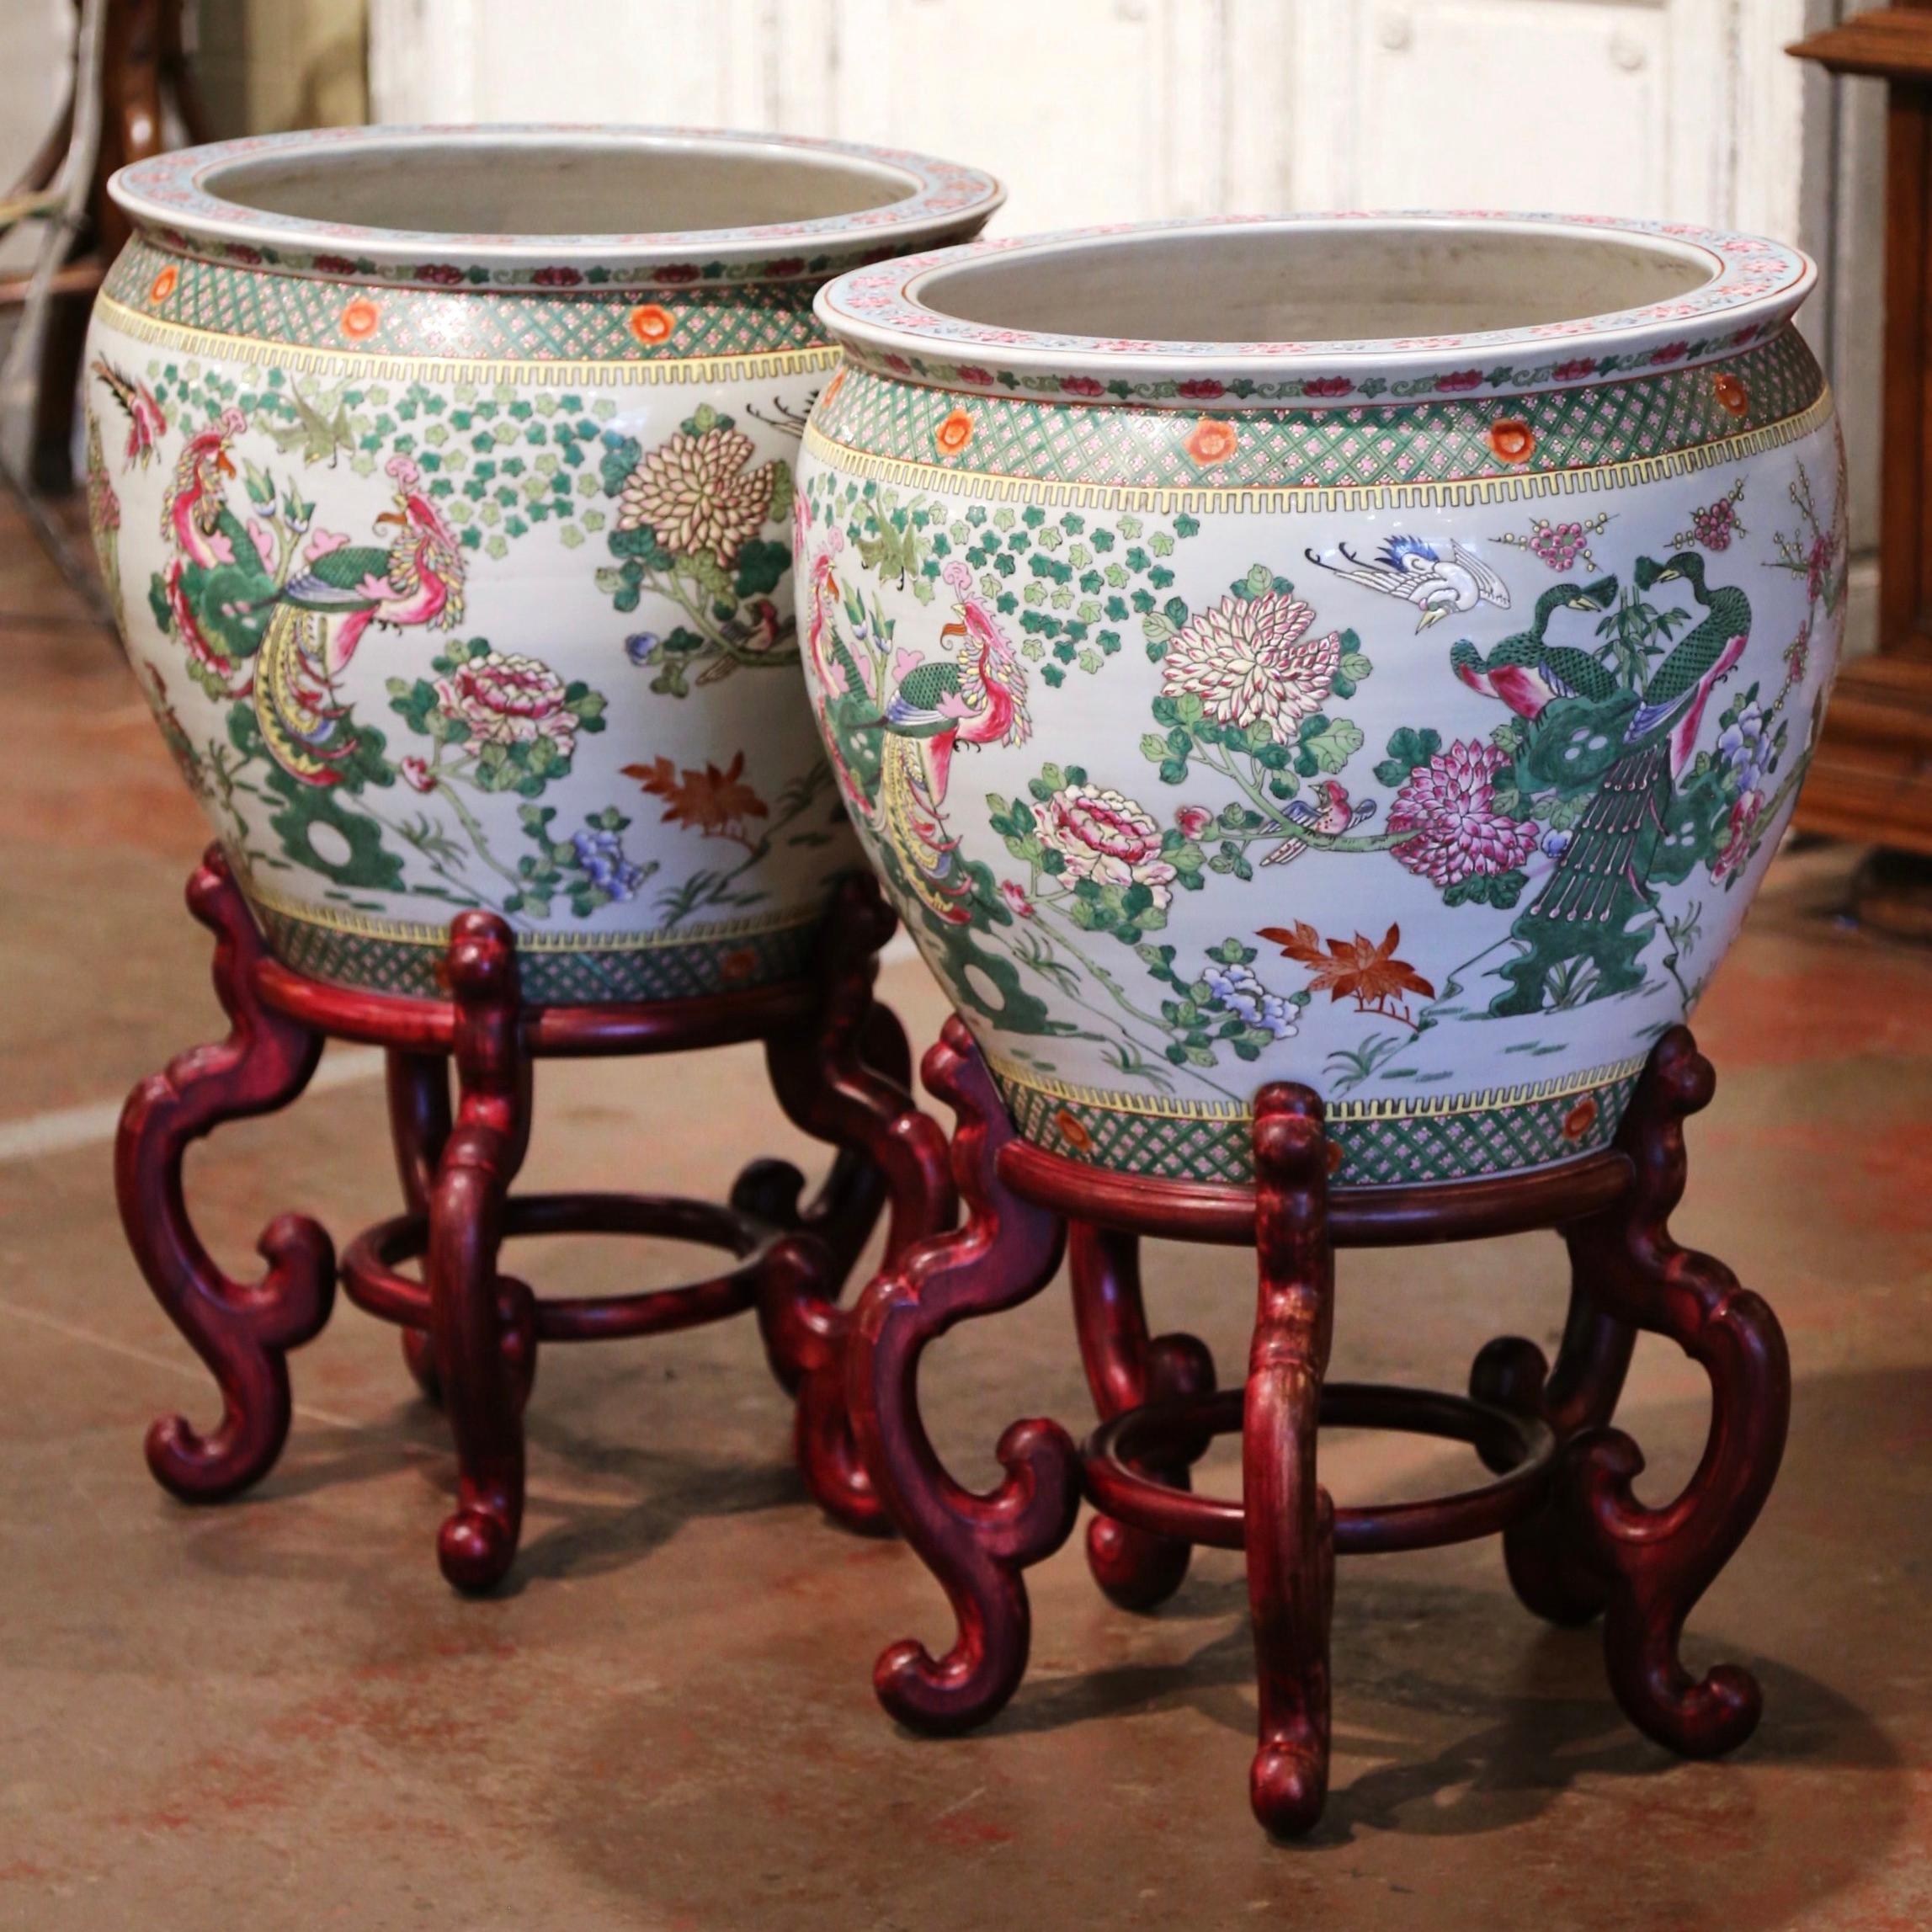 These elegant and colorful vintage fishbowls standing on carved fruitwood bases were created in China, circa 1970. Round in shape, each large exotic porcelain planter features Classic bird and peacock motifs embellished with floral decor throughout.